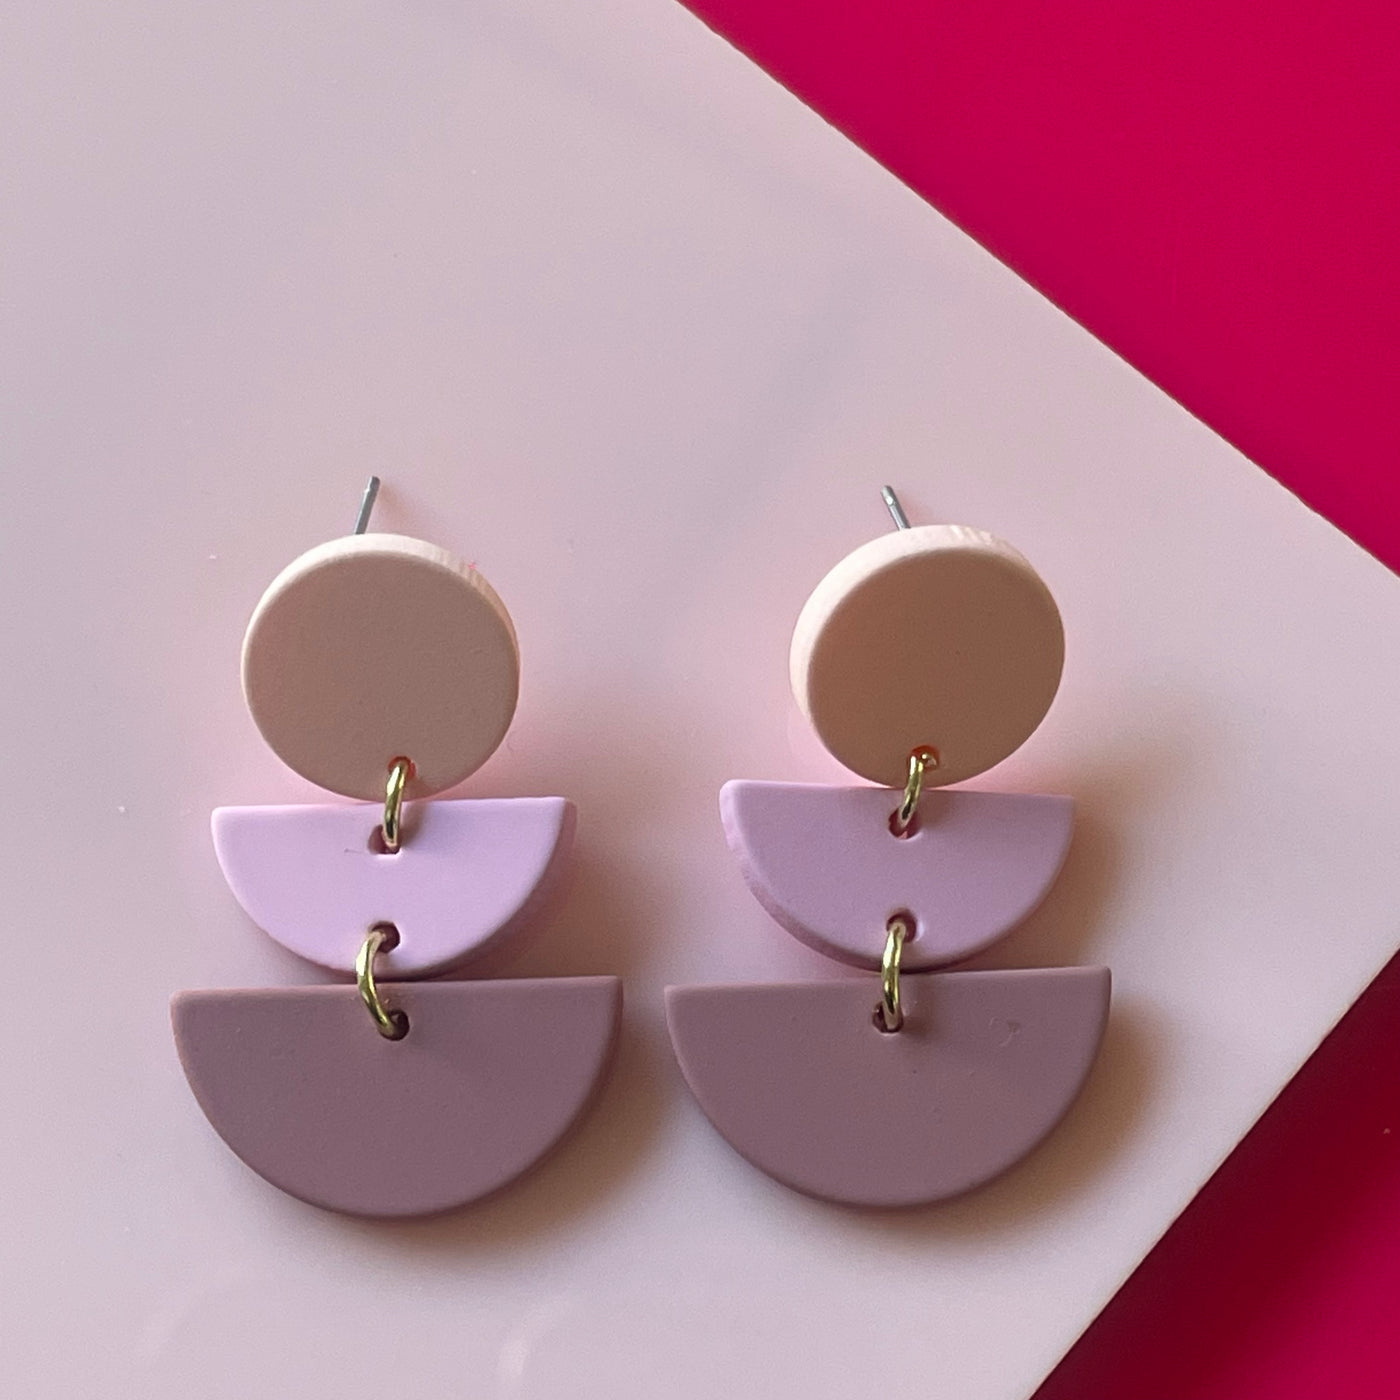 'PINK GIN' MOLLY EARRINGS - PINK